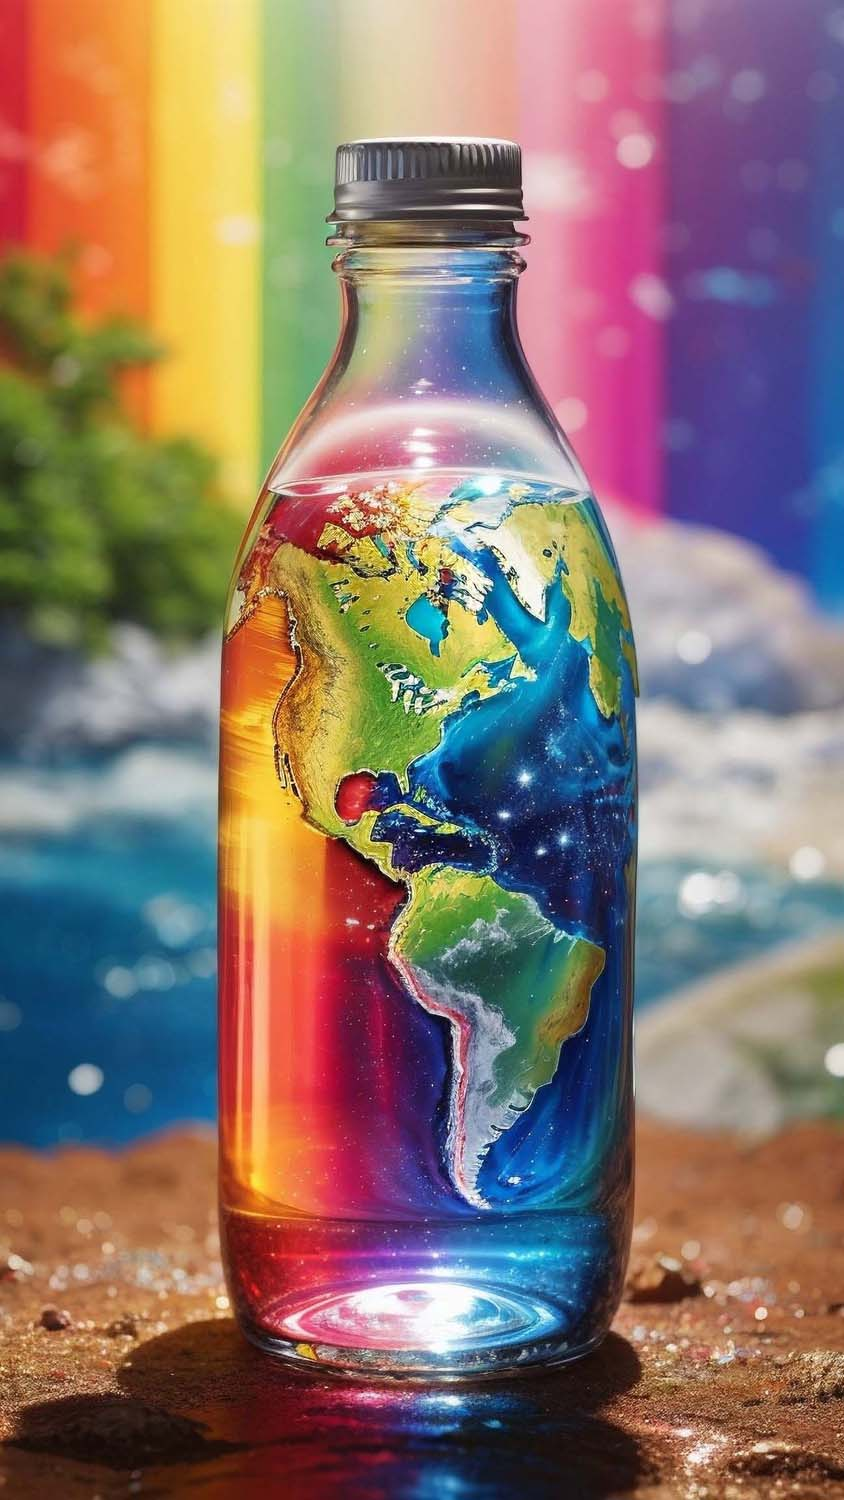 Earth Globe in Glass iPhone Wallpaper 4K  iPhone Wallpapers